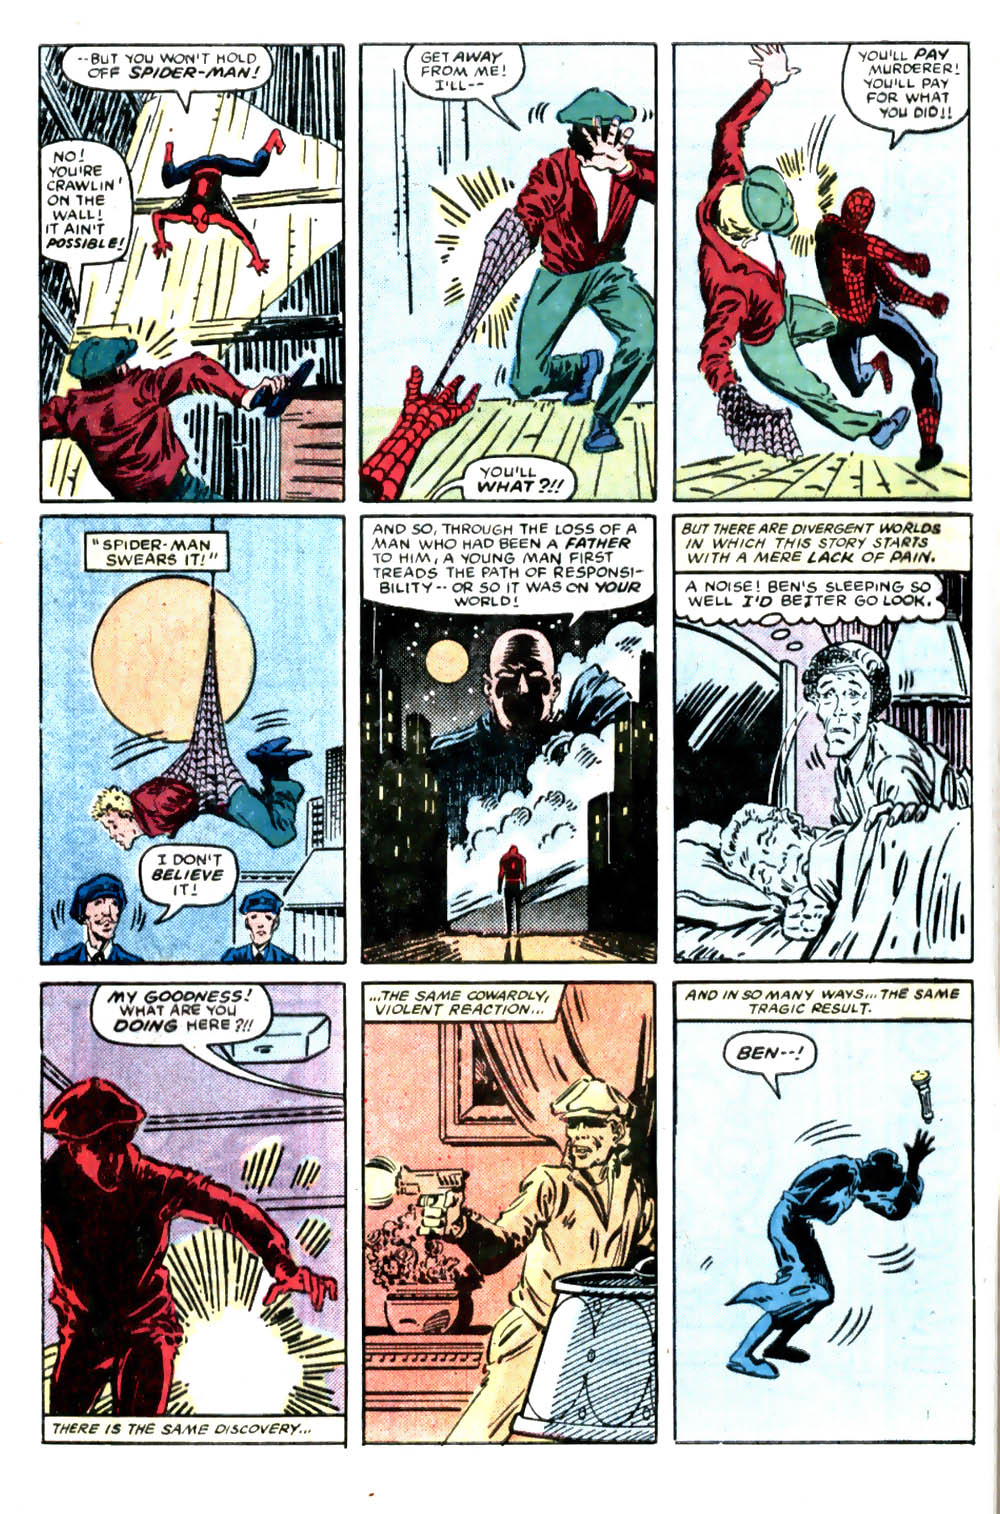 What If? (1977) issue 46 - Spiderman's uncle ben had lived - Page 6